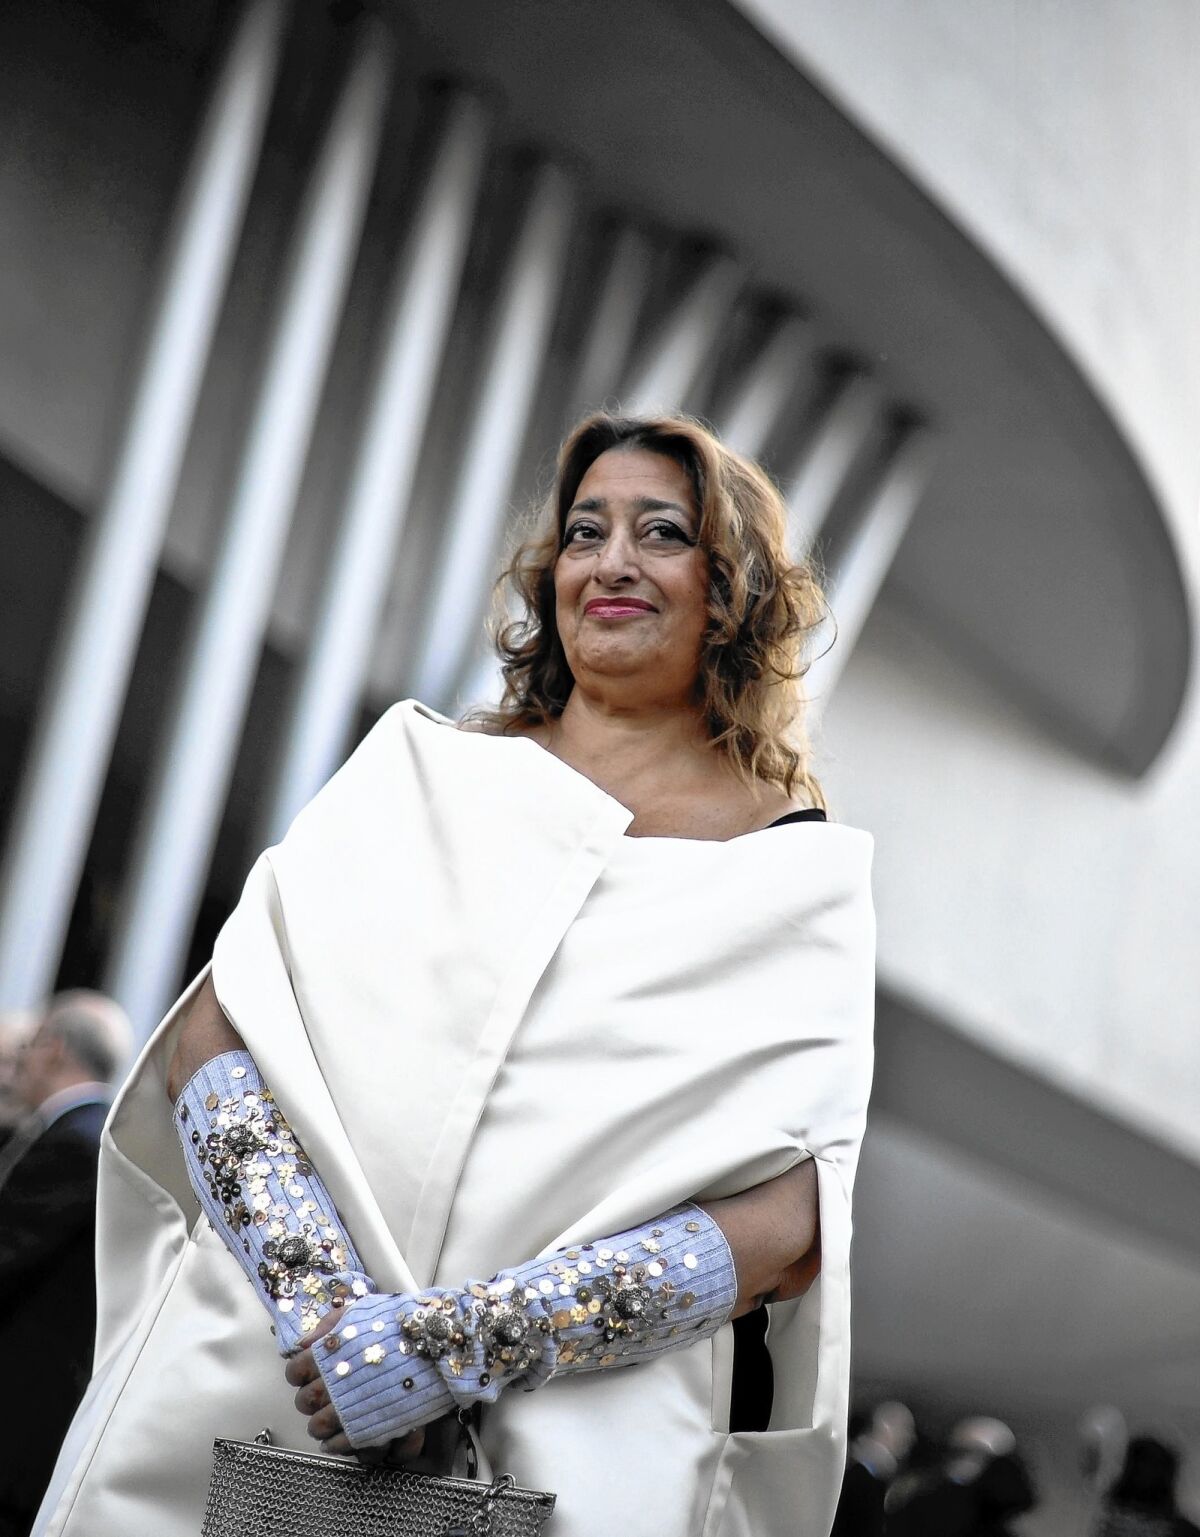 Influential Iraqi-British architect Zaha Hadid poses for a photo during the opening ceremony of the National Museum of 21st Century Arts (MAXXI), in Rome, Italy in 2010. Hadid died last month at age 65.